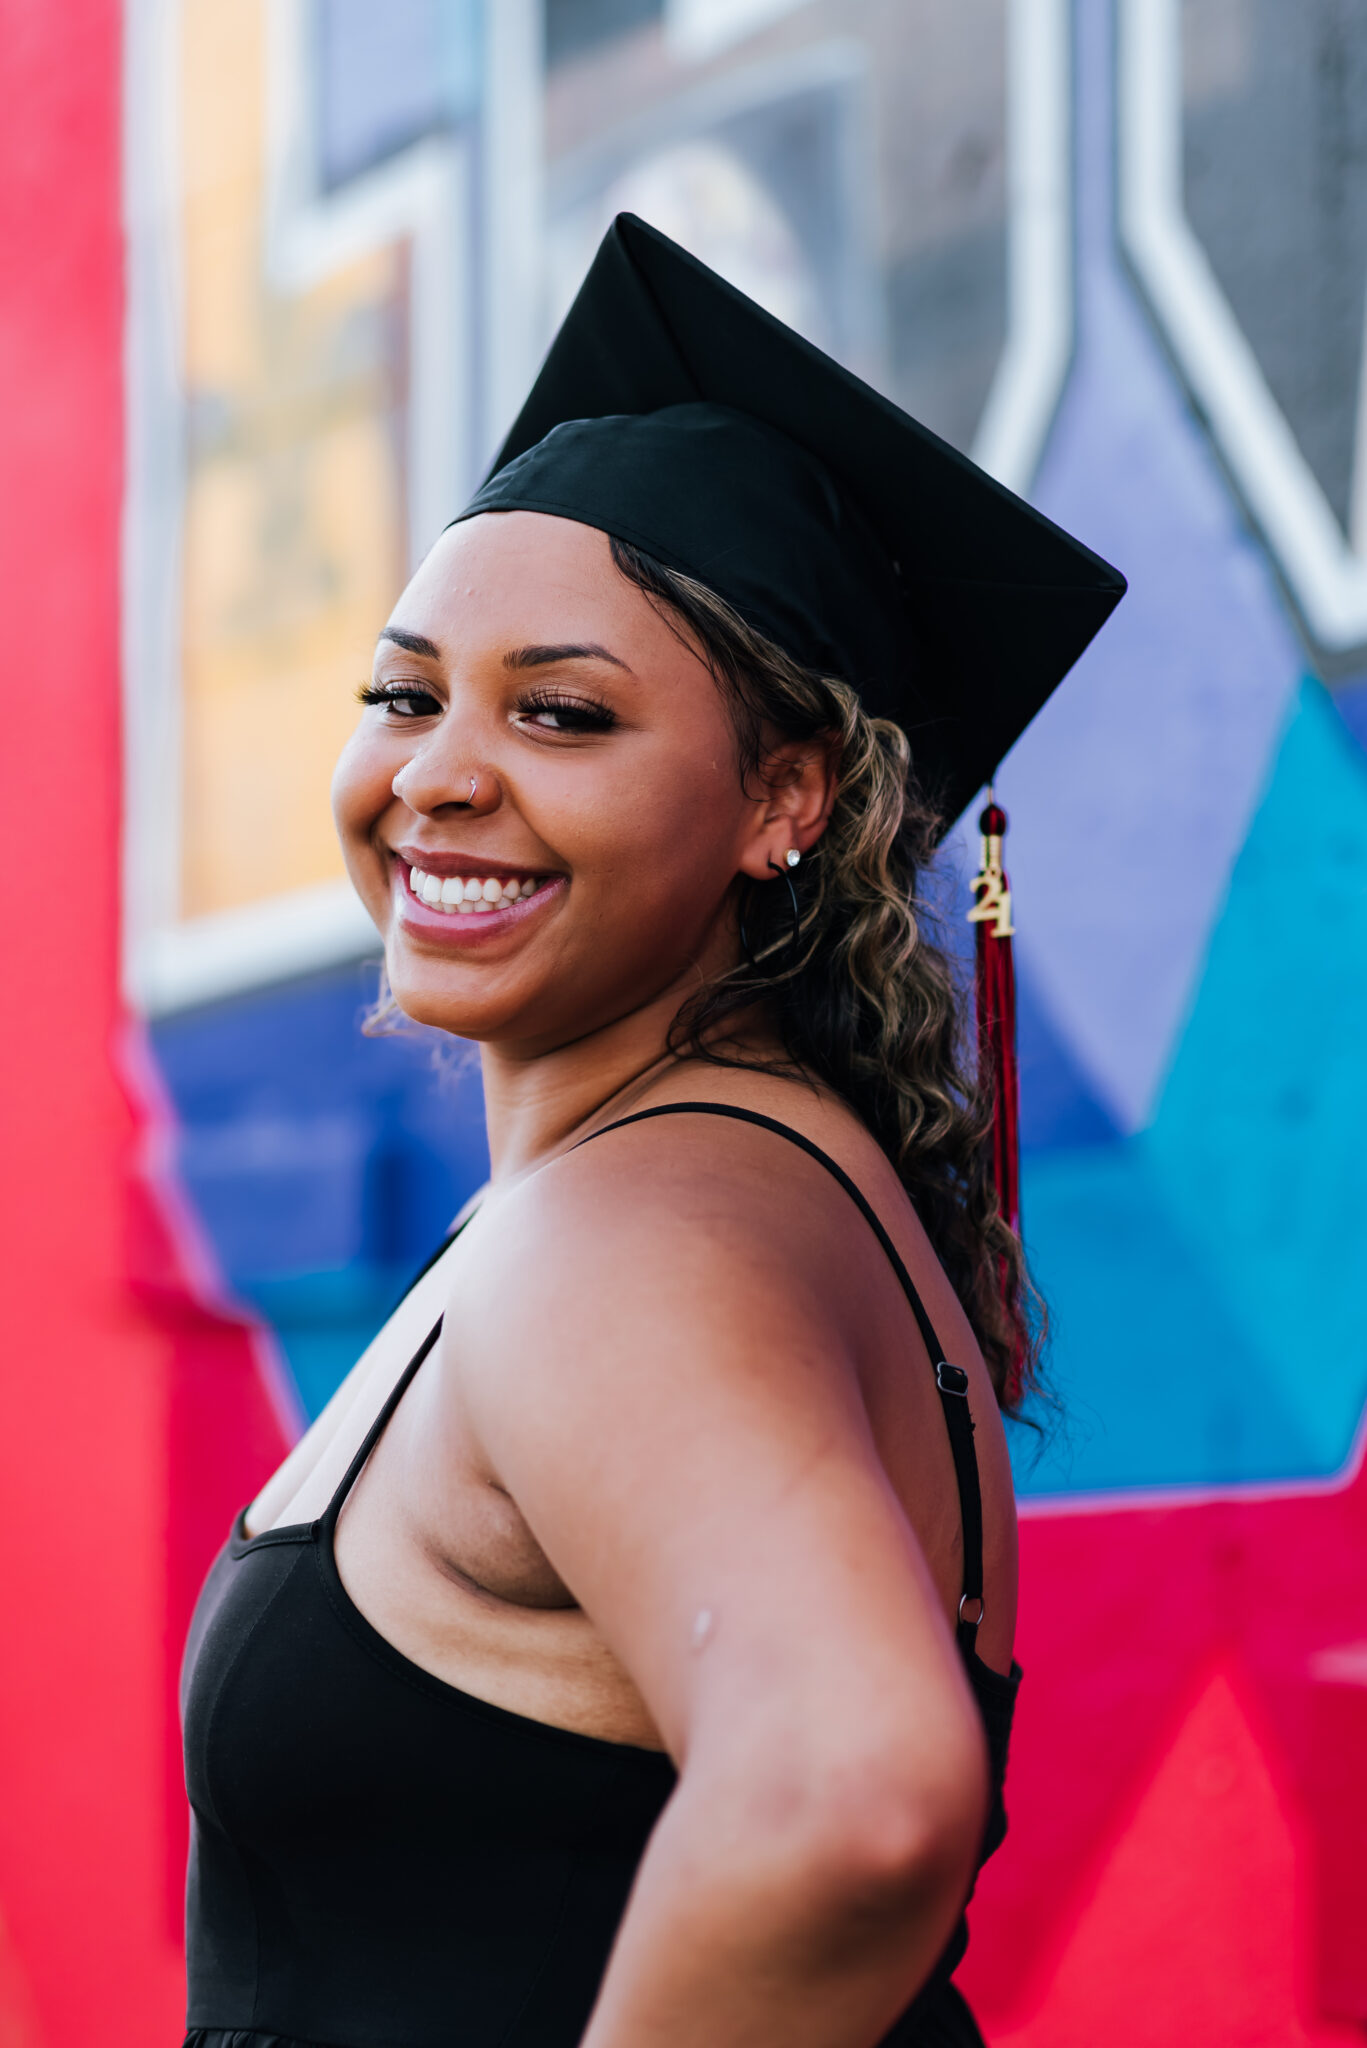 Teen in a black dress and graduation cap smiles in front of a colorful mural